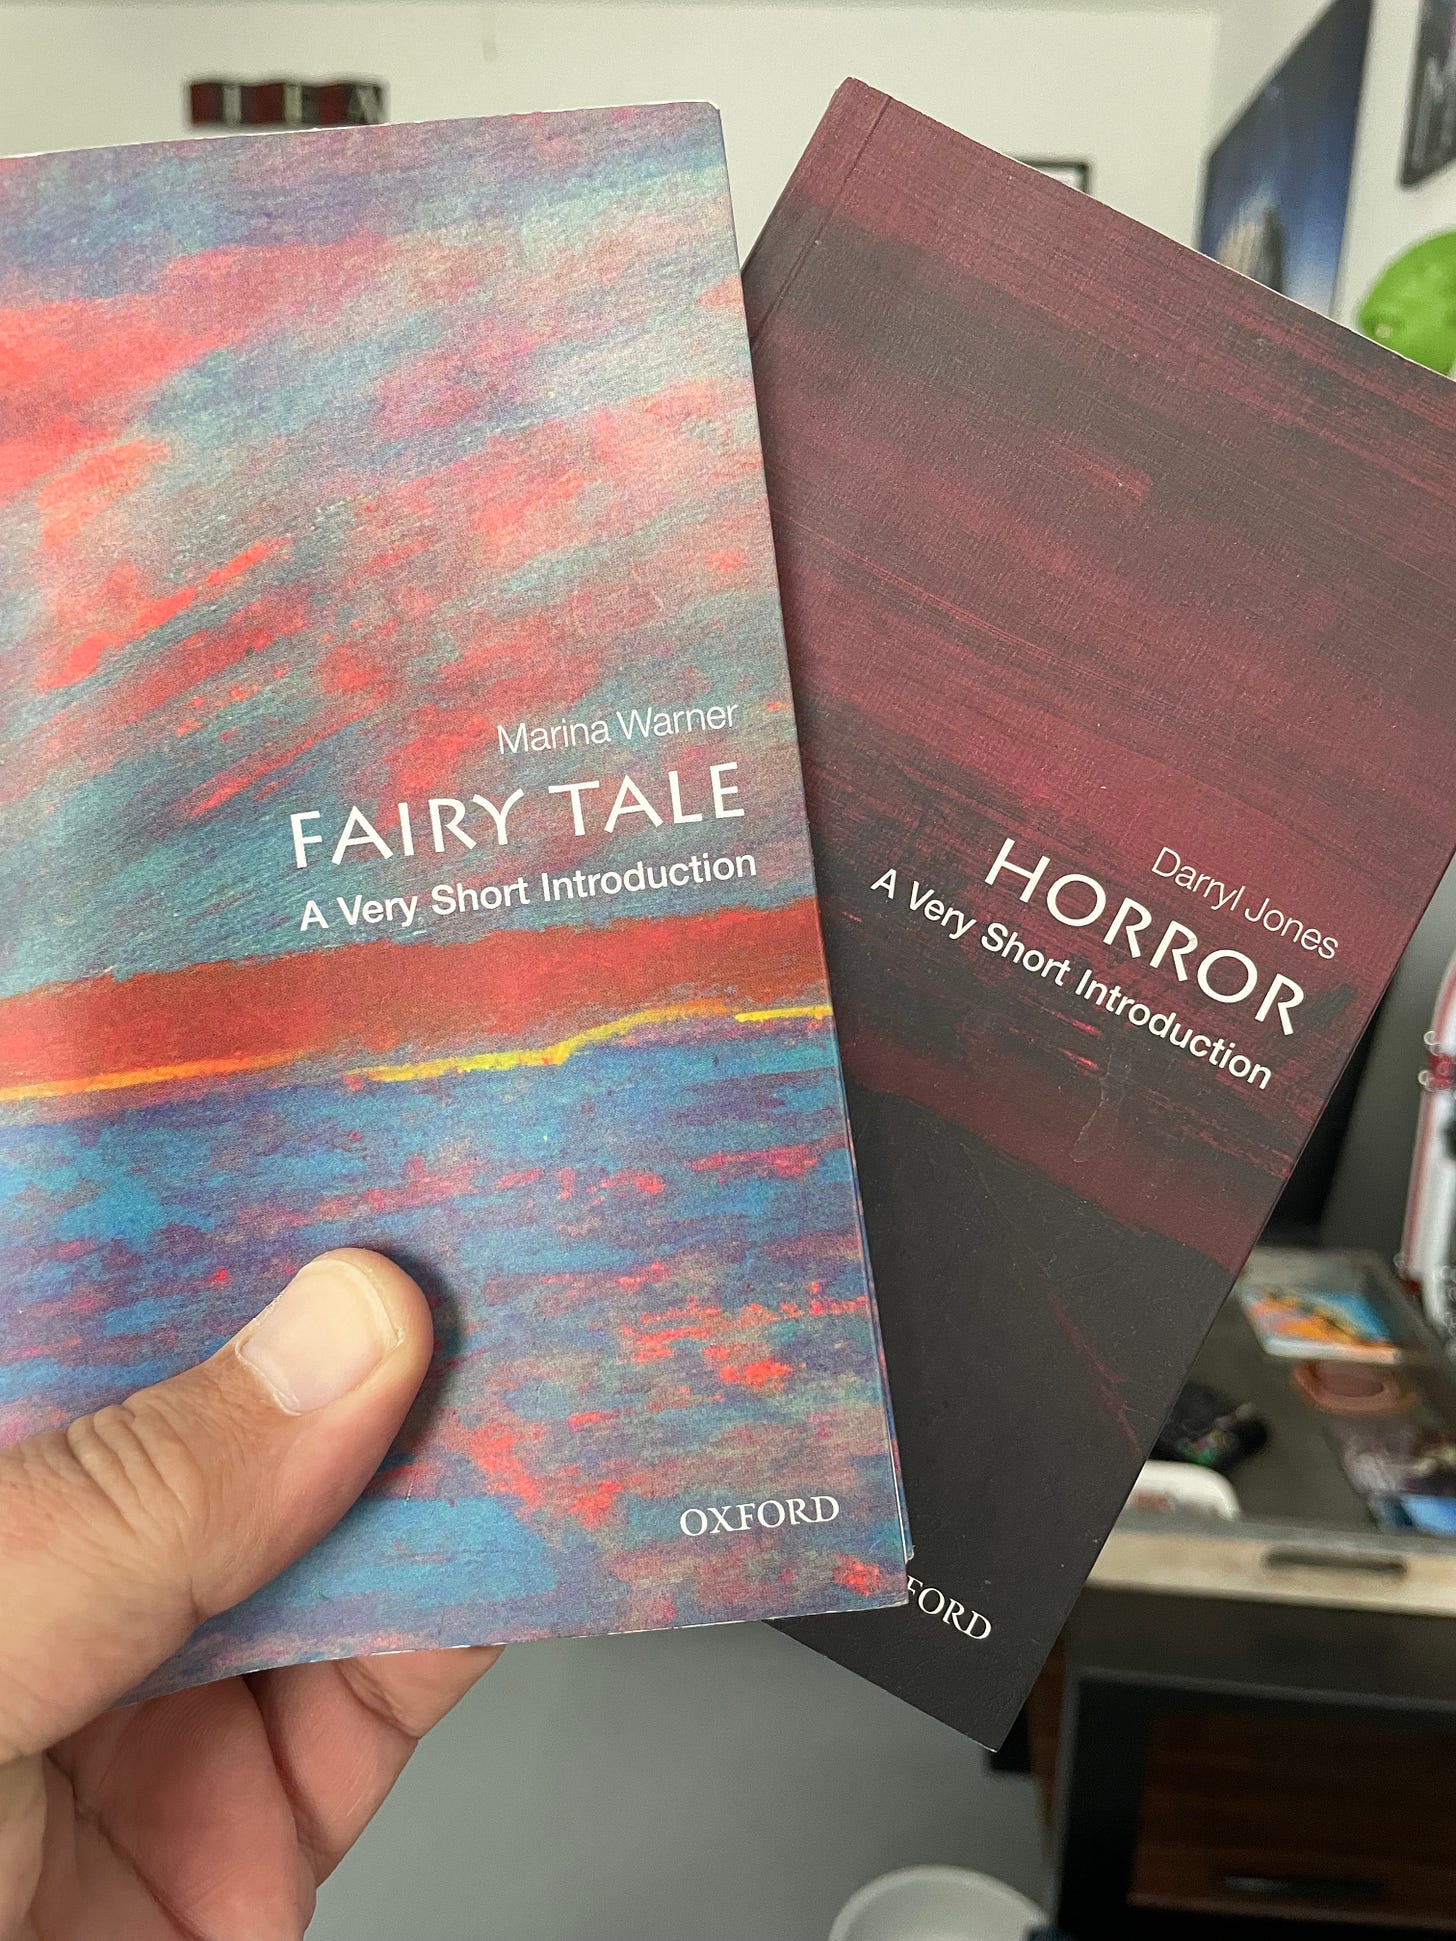 A hand holding two books (Horror, Fairy Tale) from A Very Short Introduction Series of books by Oxford Press